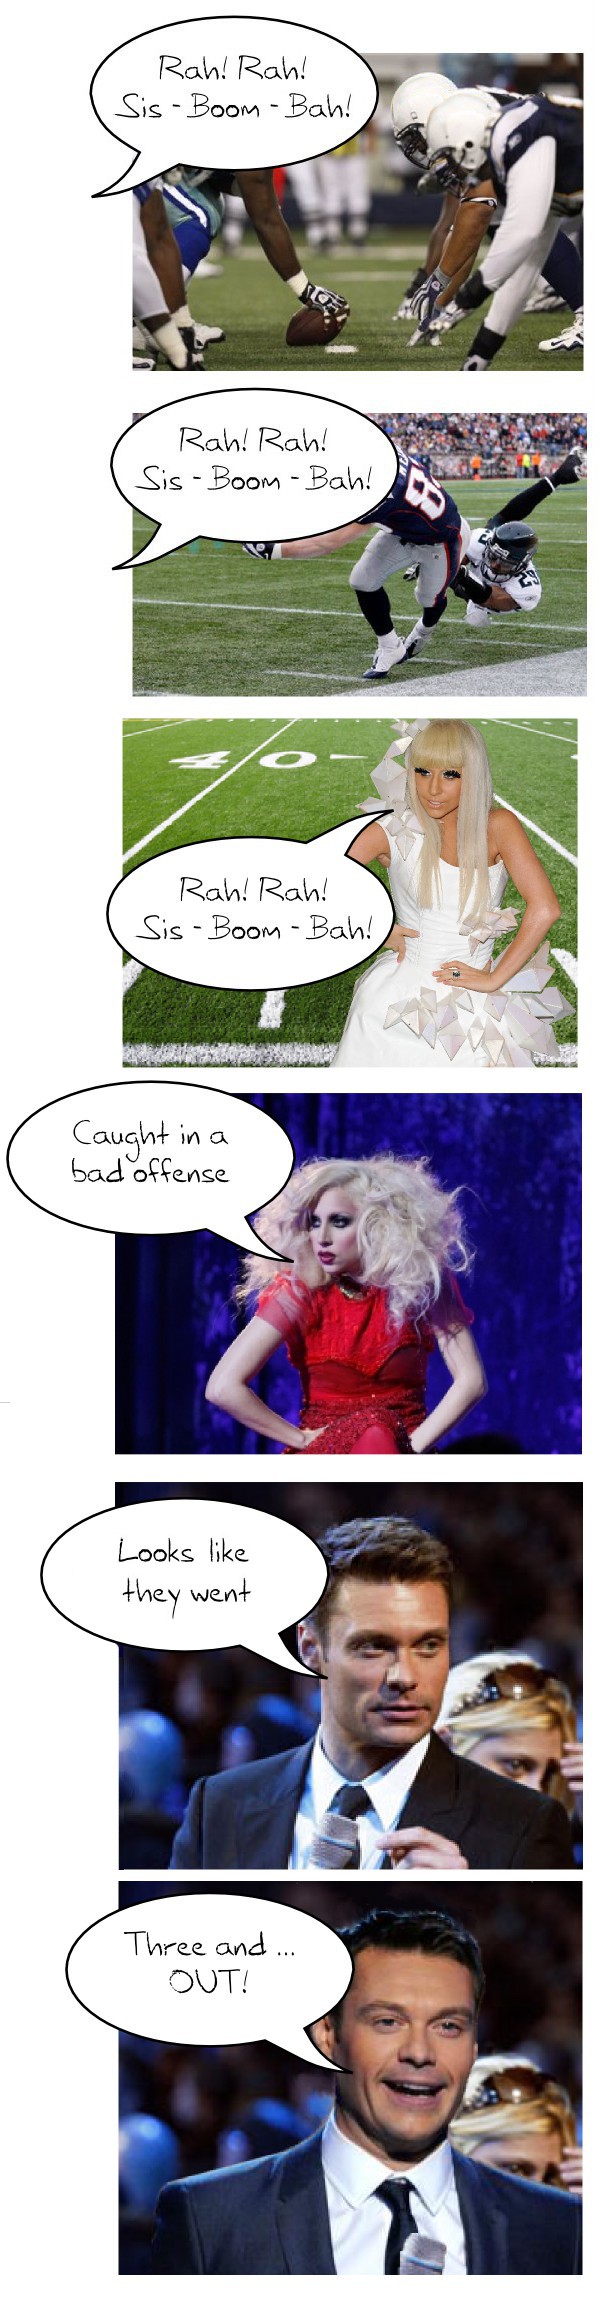 comic of Lady Gaga cheering for a football game, accompanied by Ryan Seacrest